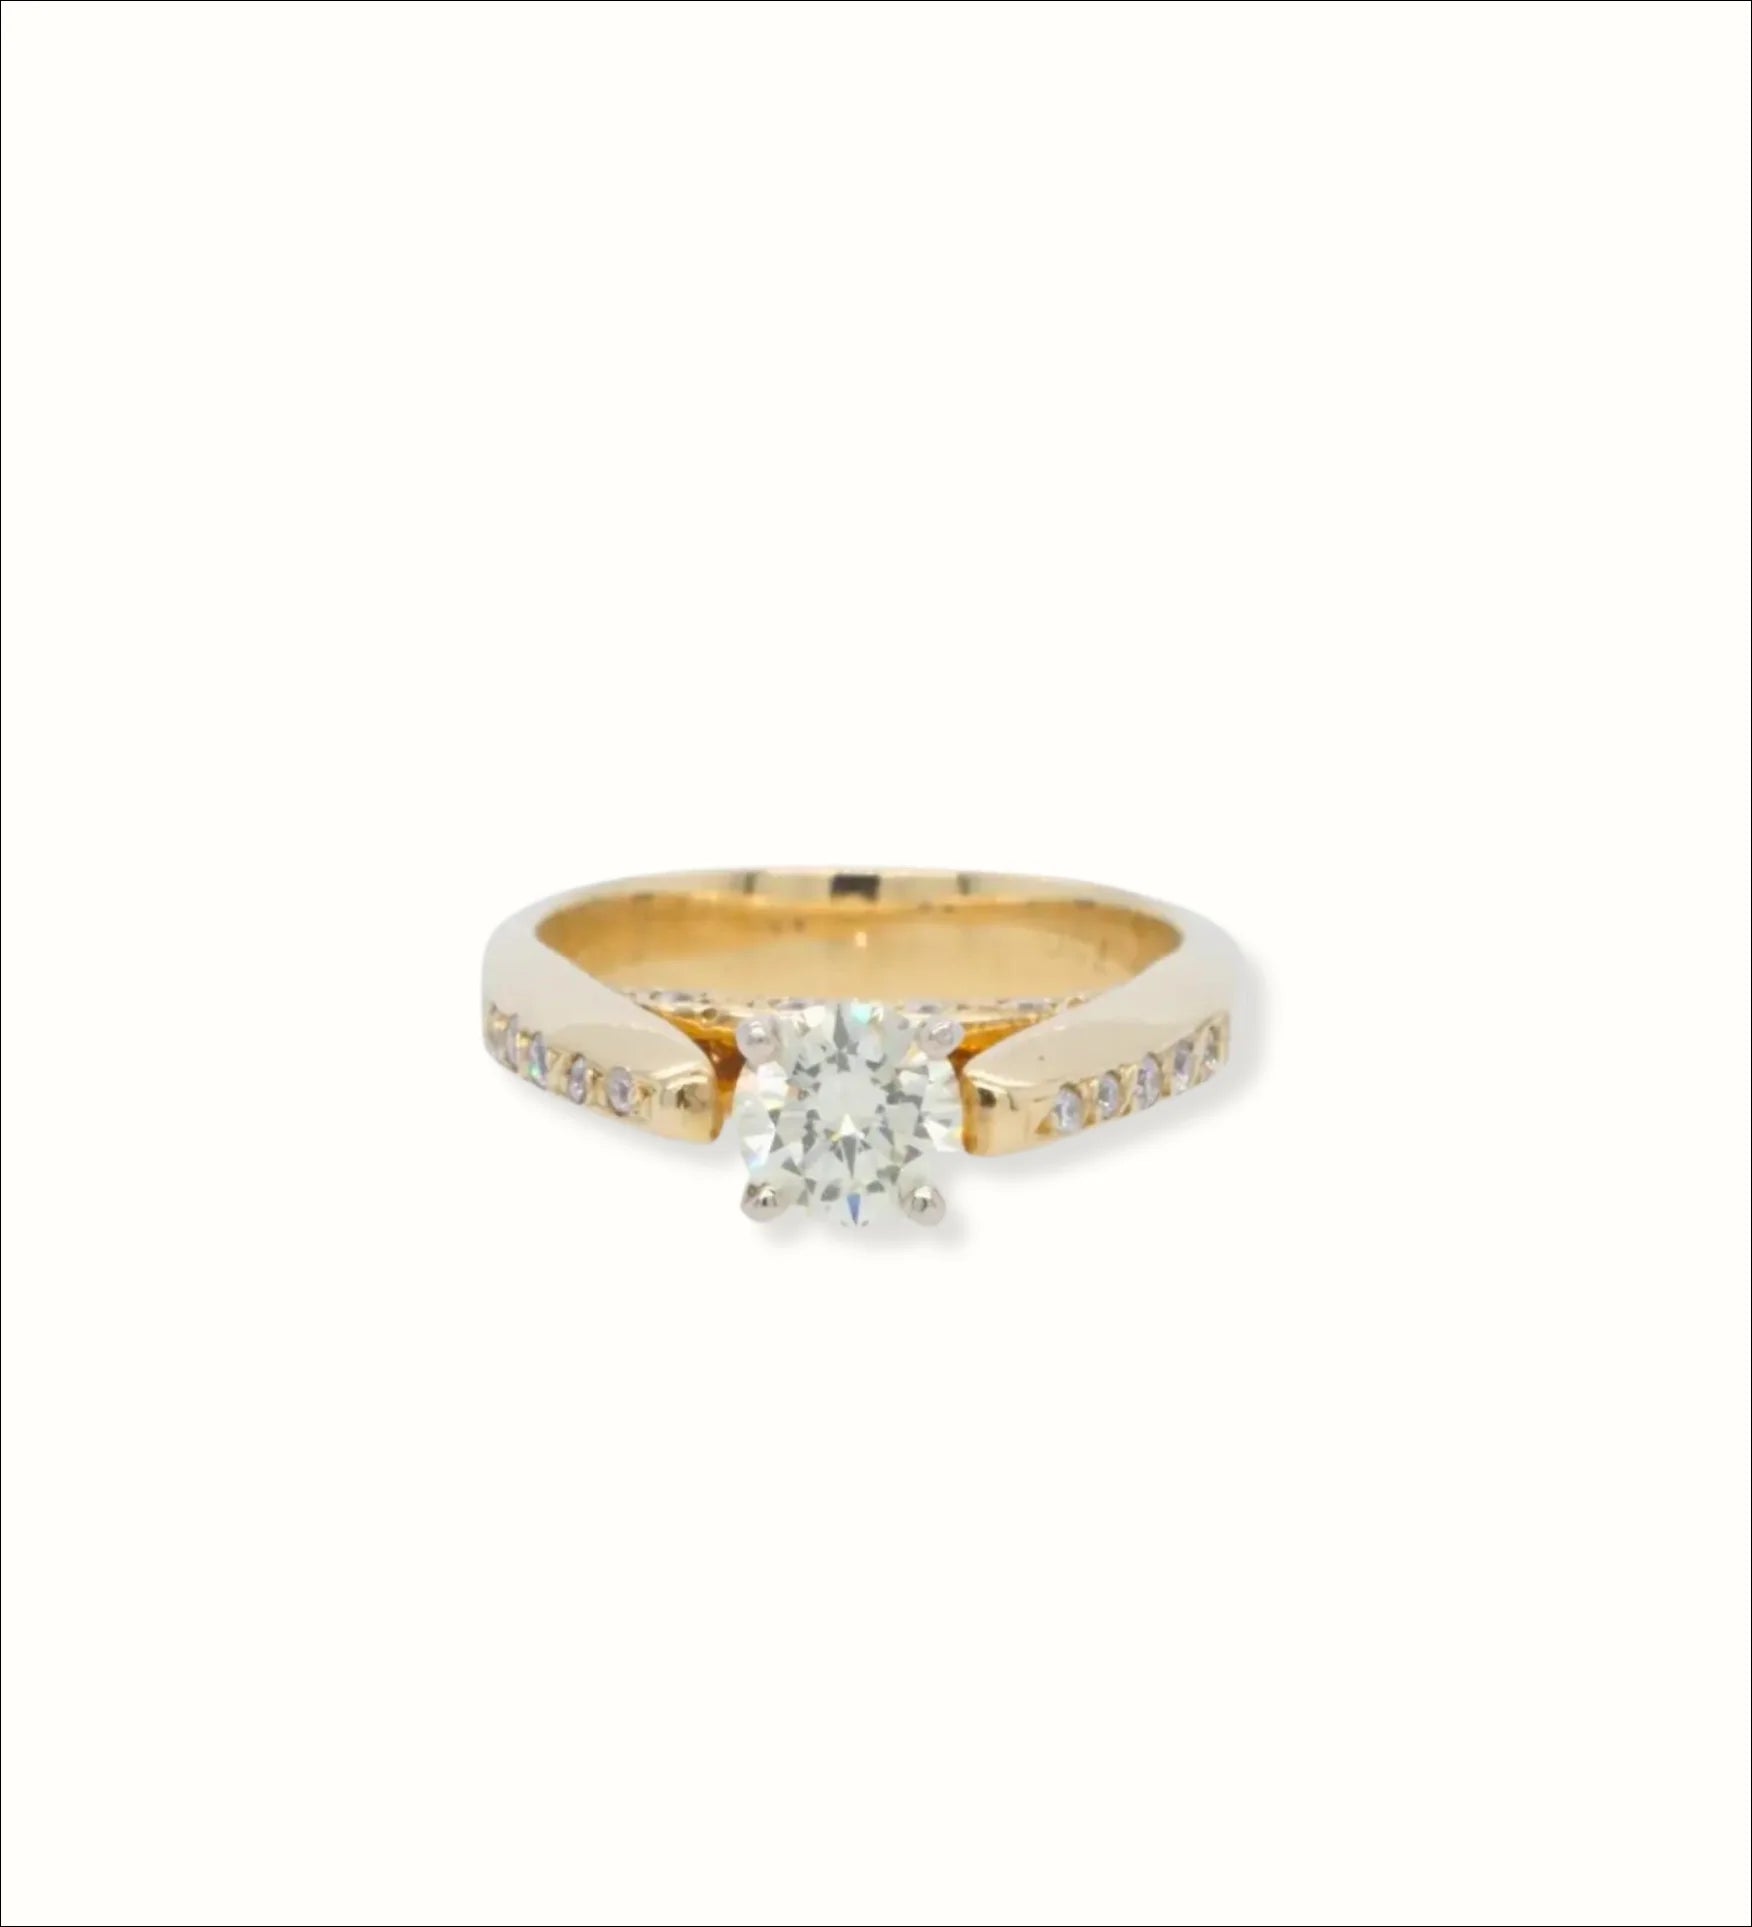 Eternal Love 18k Diamond Engagement Ring | Home page